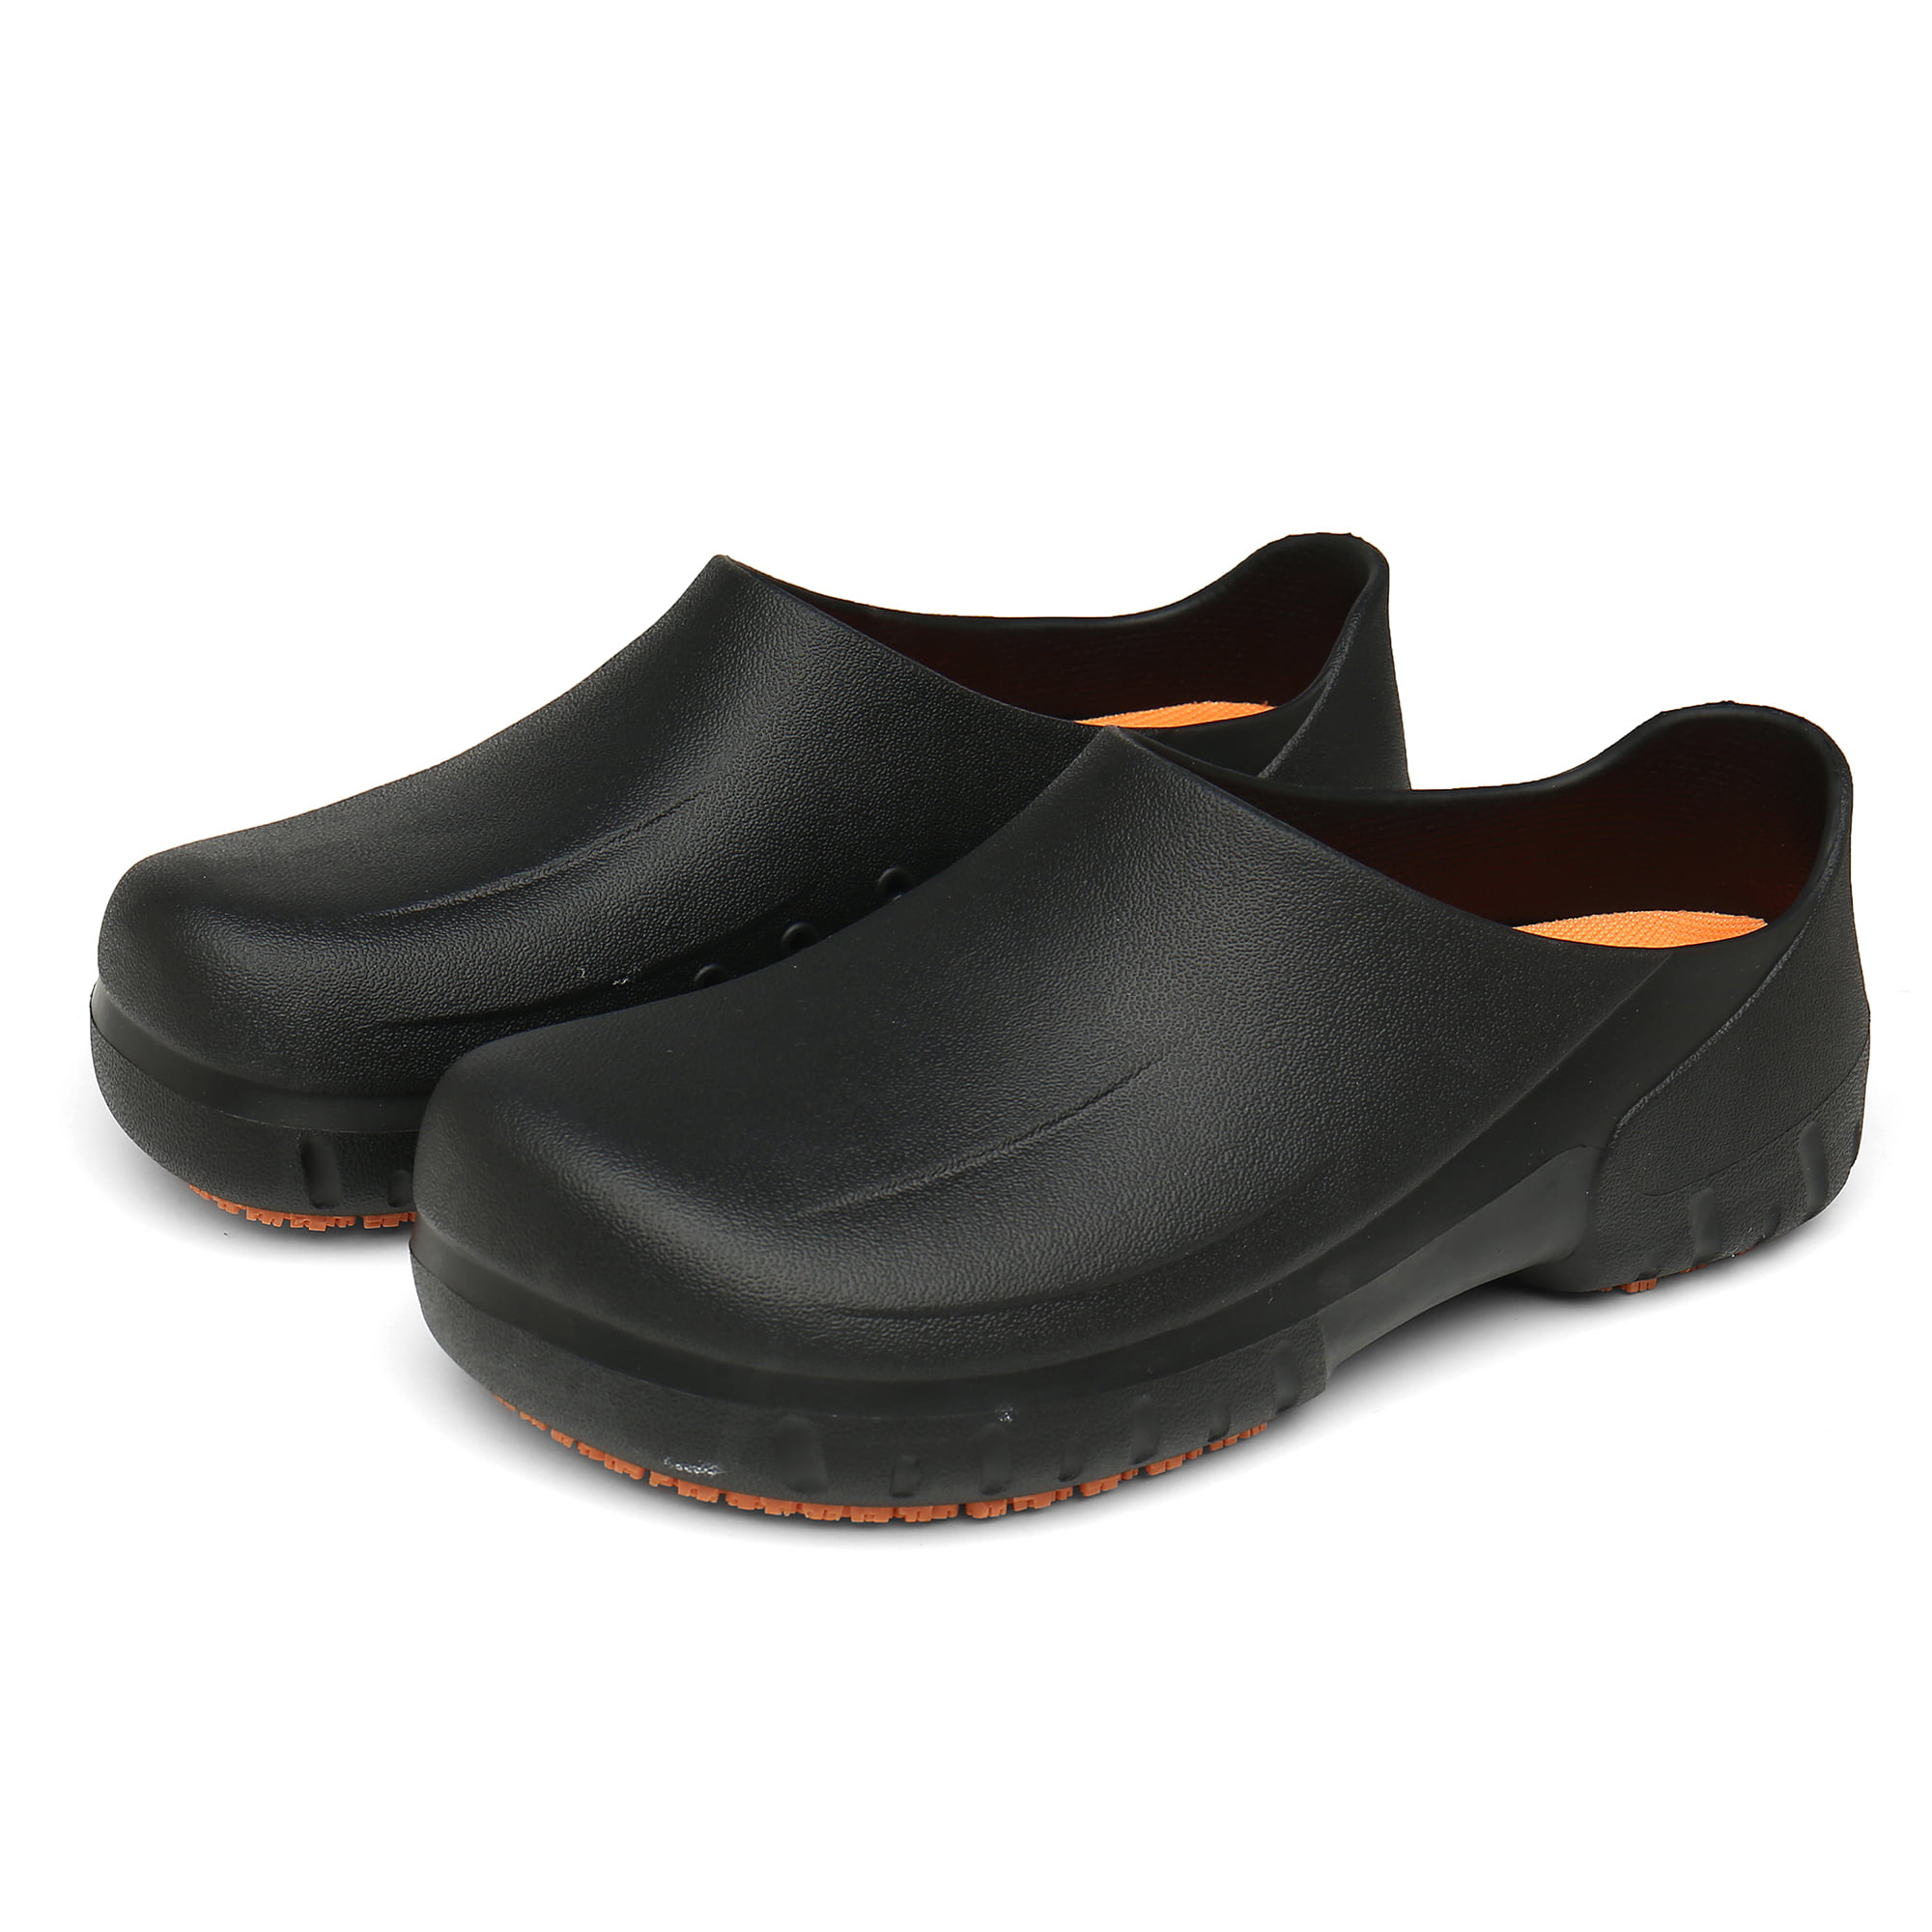 Slip Resistant Chef, Kitchen, and Restaurant Shoes